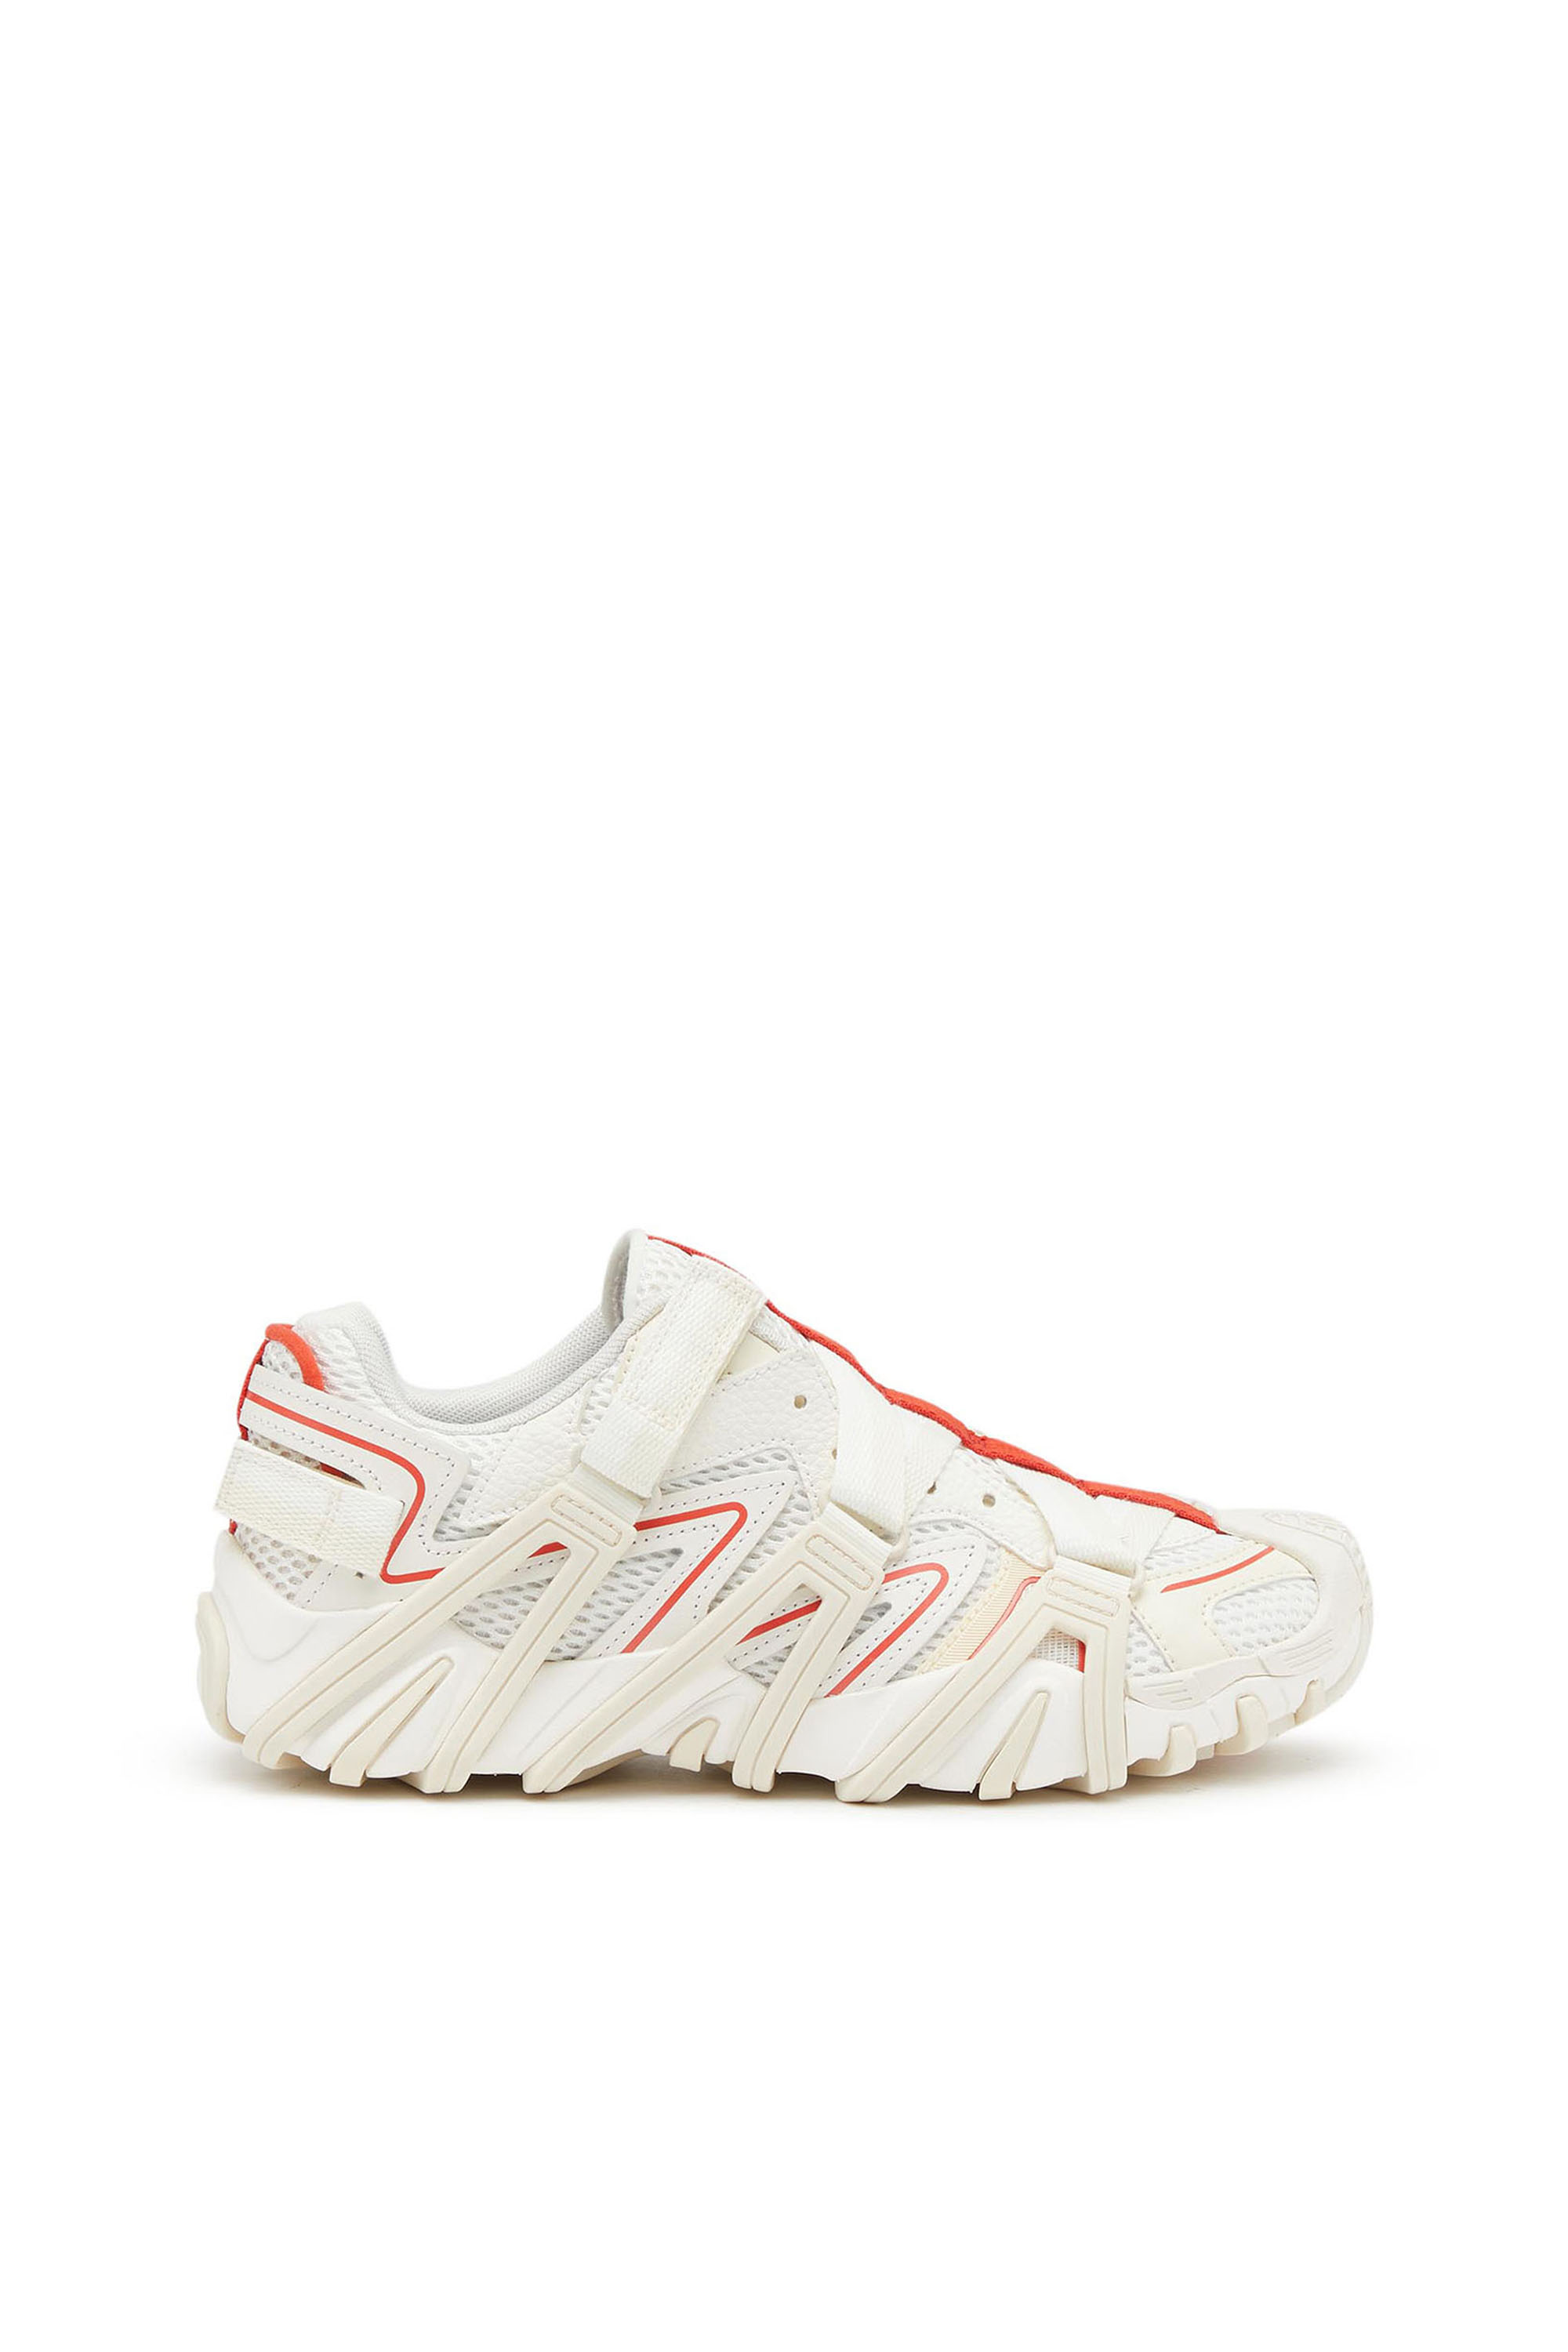 Diesel - S-PROTOTYPE-CR  W, Female S-Prototype-CR  W - Cage sneakers in mesh and leather in Multicolor - Image 1